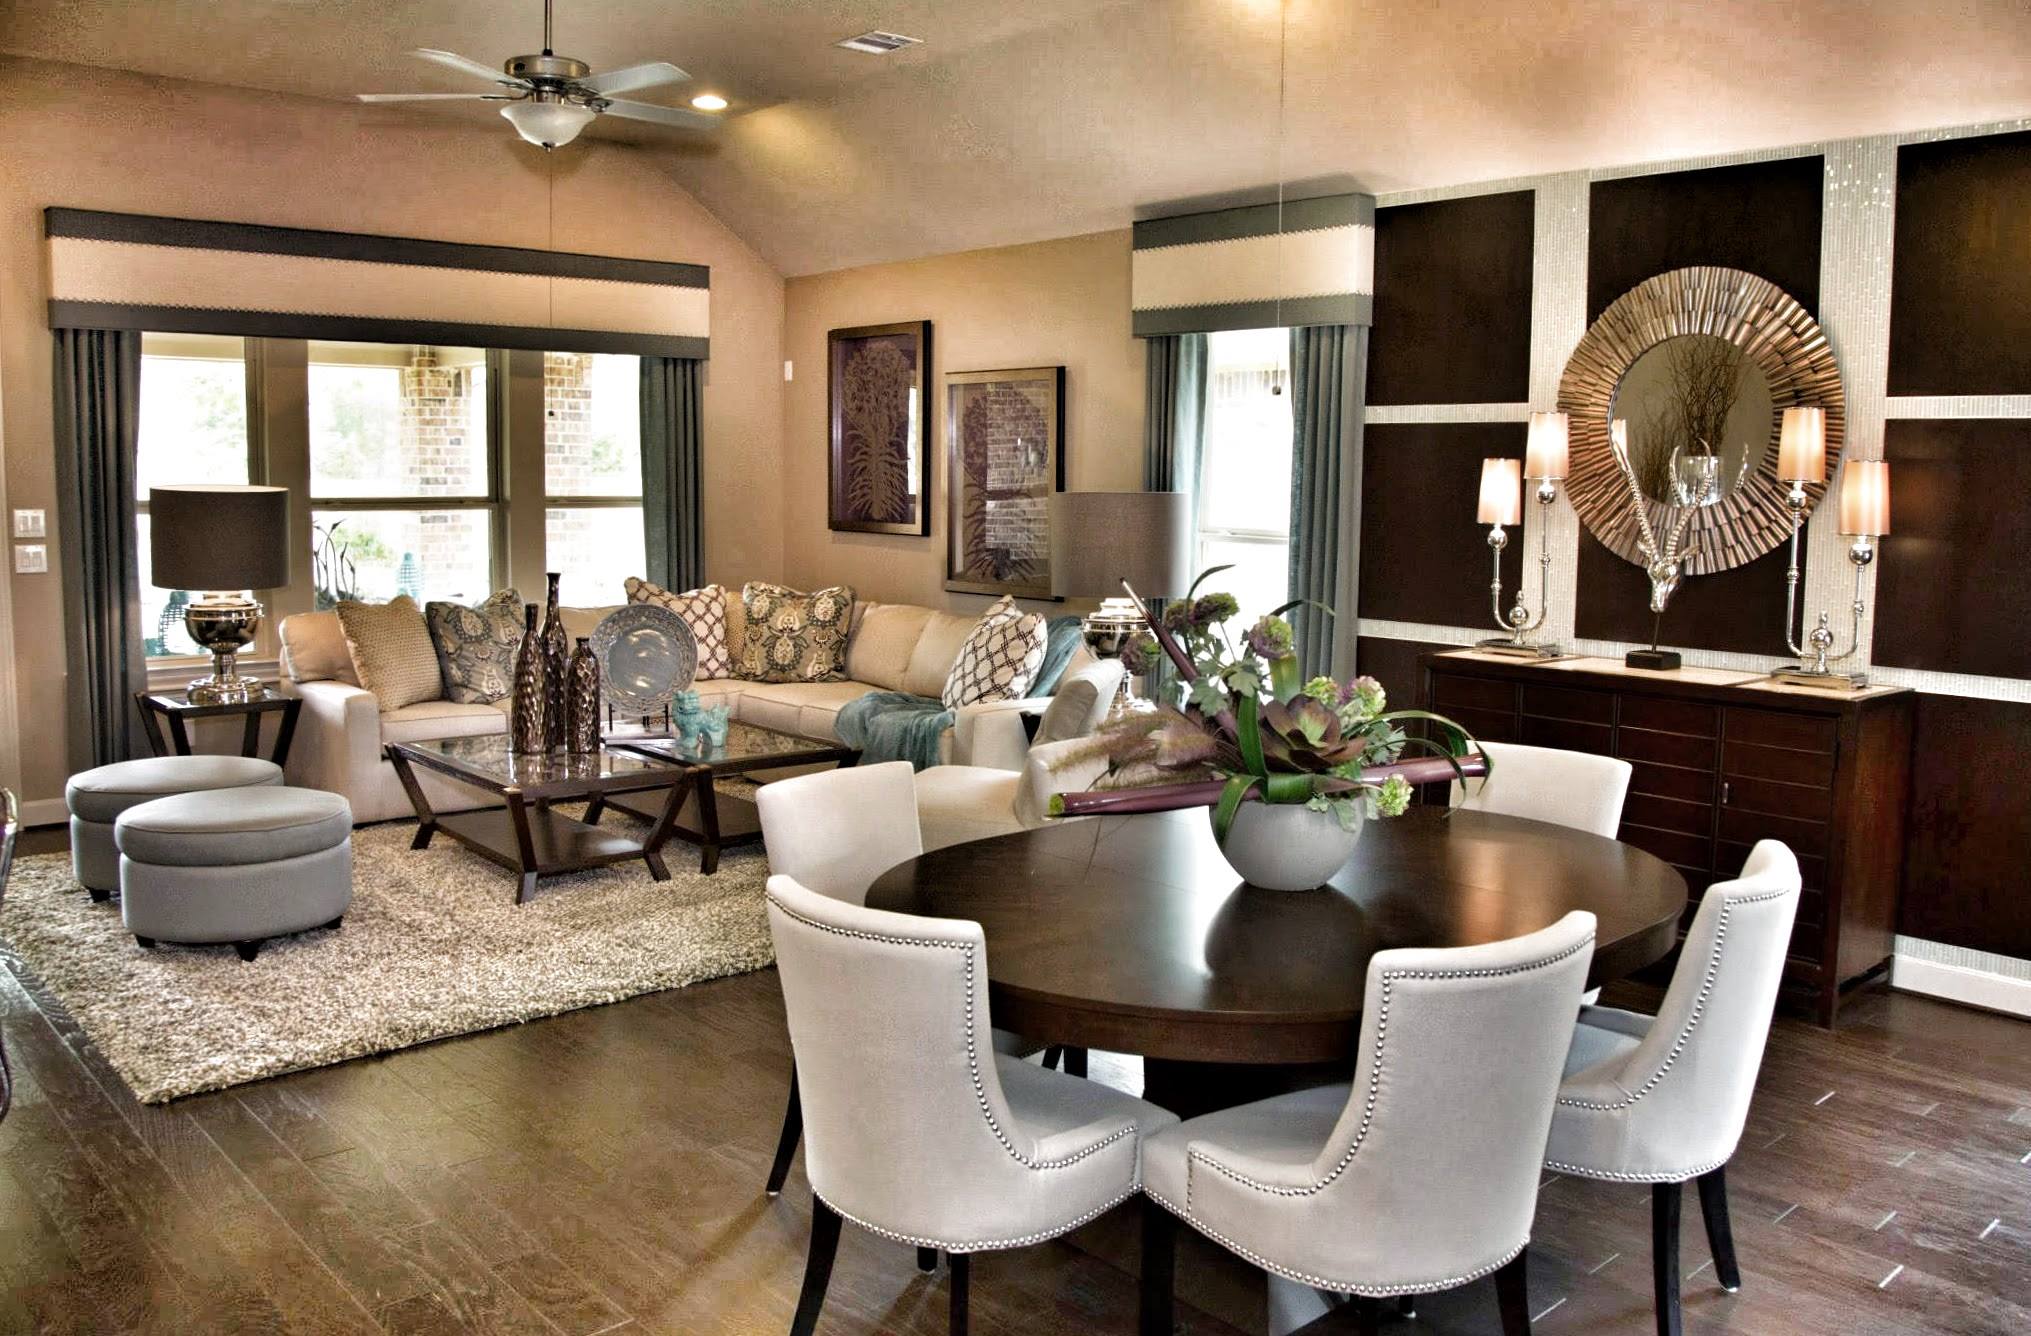 Bonterra is focused on more than just homes – it’s about an all-around lifestyle.